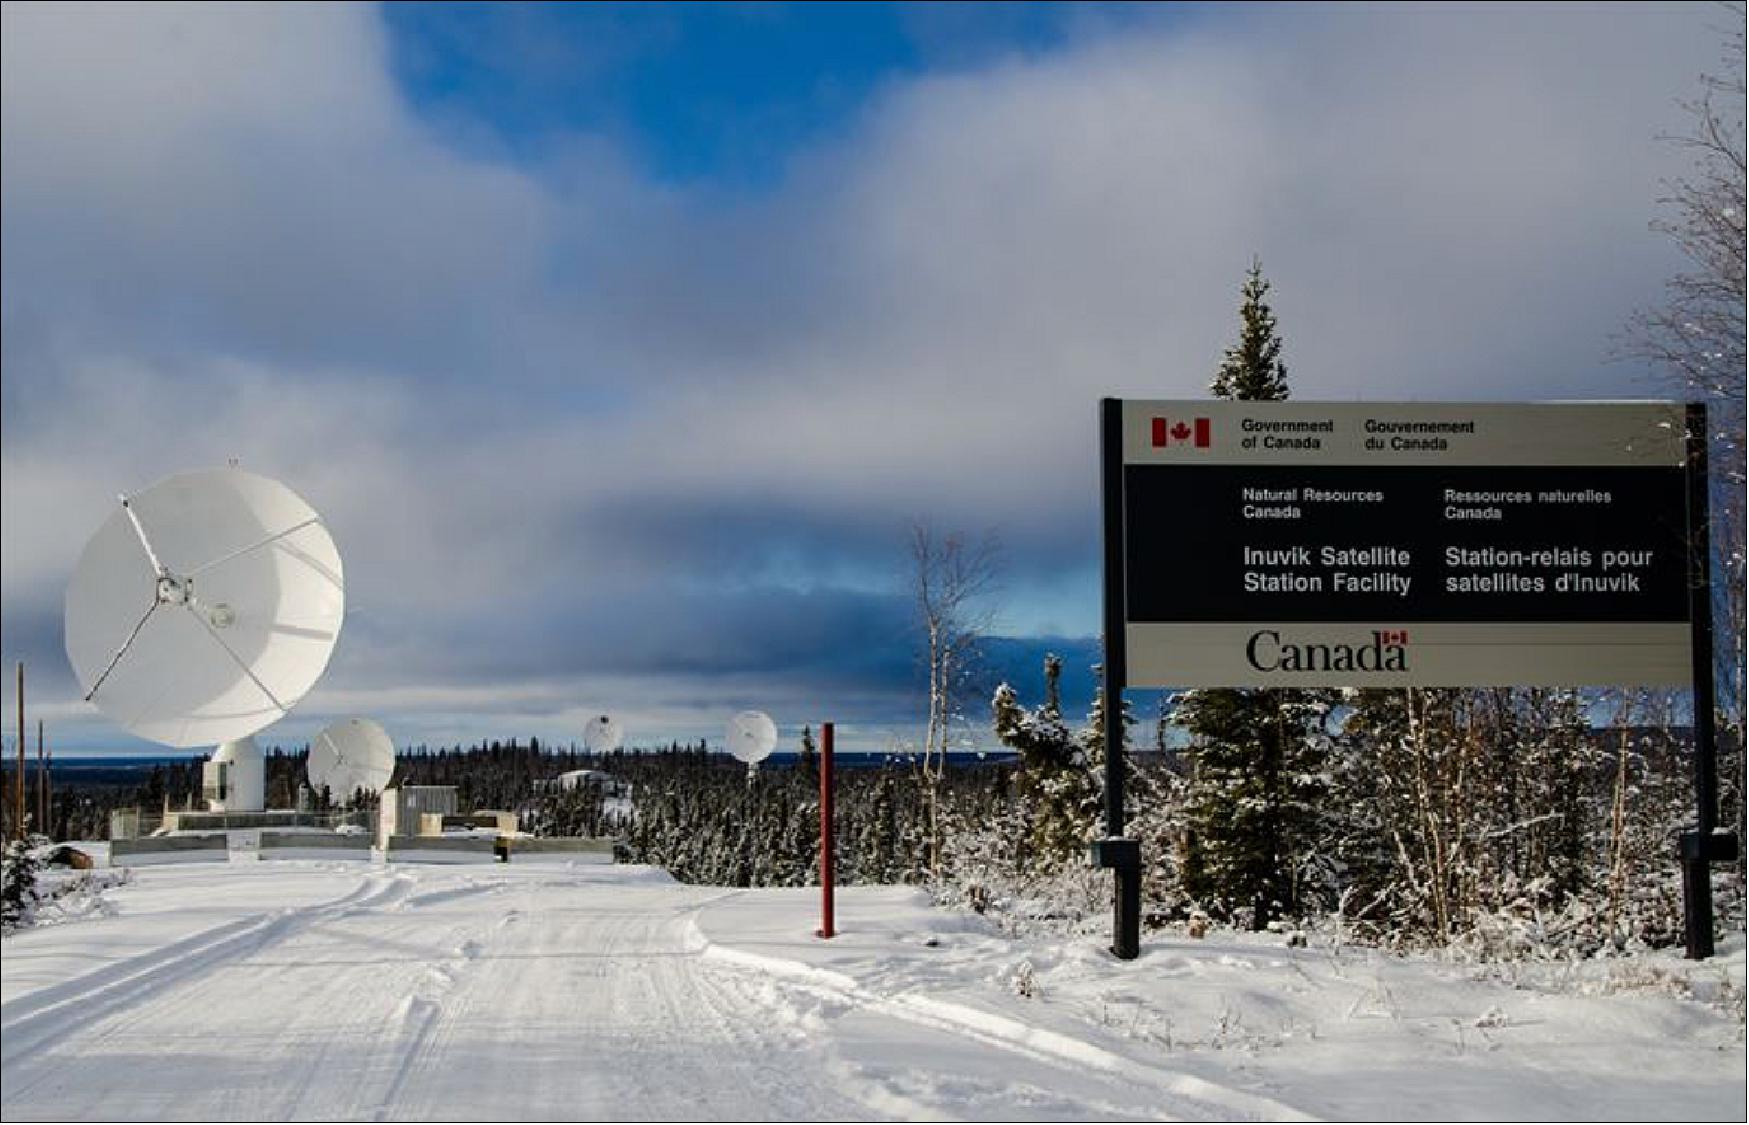 Figure 3: Photo of ISSF (Inuvik Satellite Station Facility ) as seen from the entrance (image credit: NRCan)